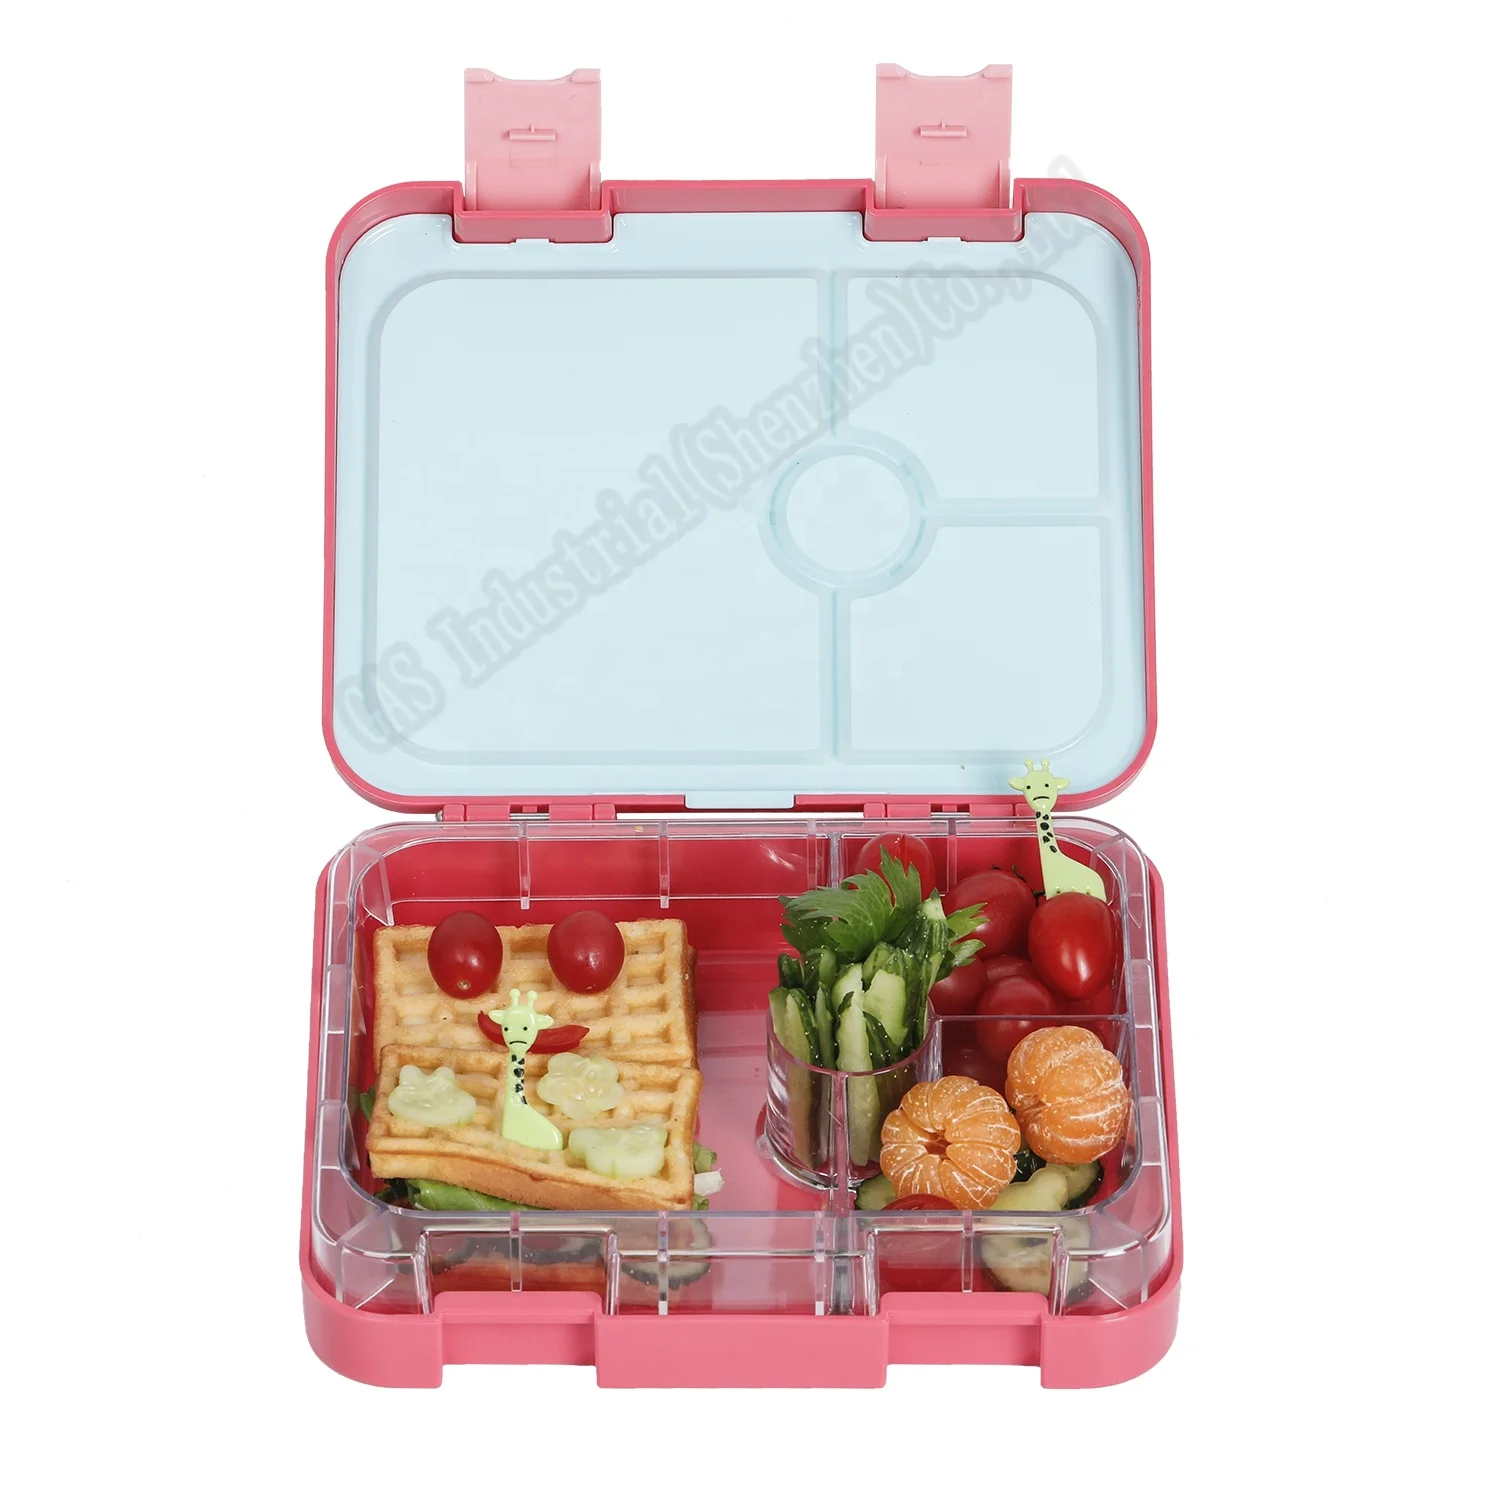 Download Highest Quality Abs And Tritan Plastics 4-compartment Design Bento Lunch Box For Kids/adults ...